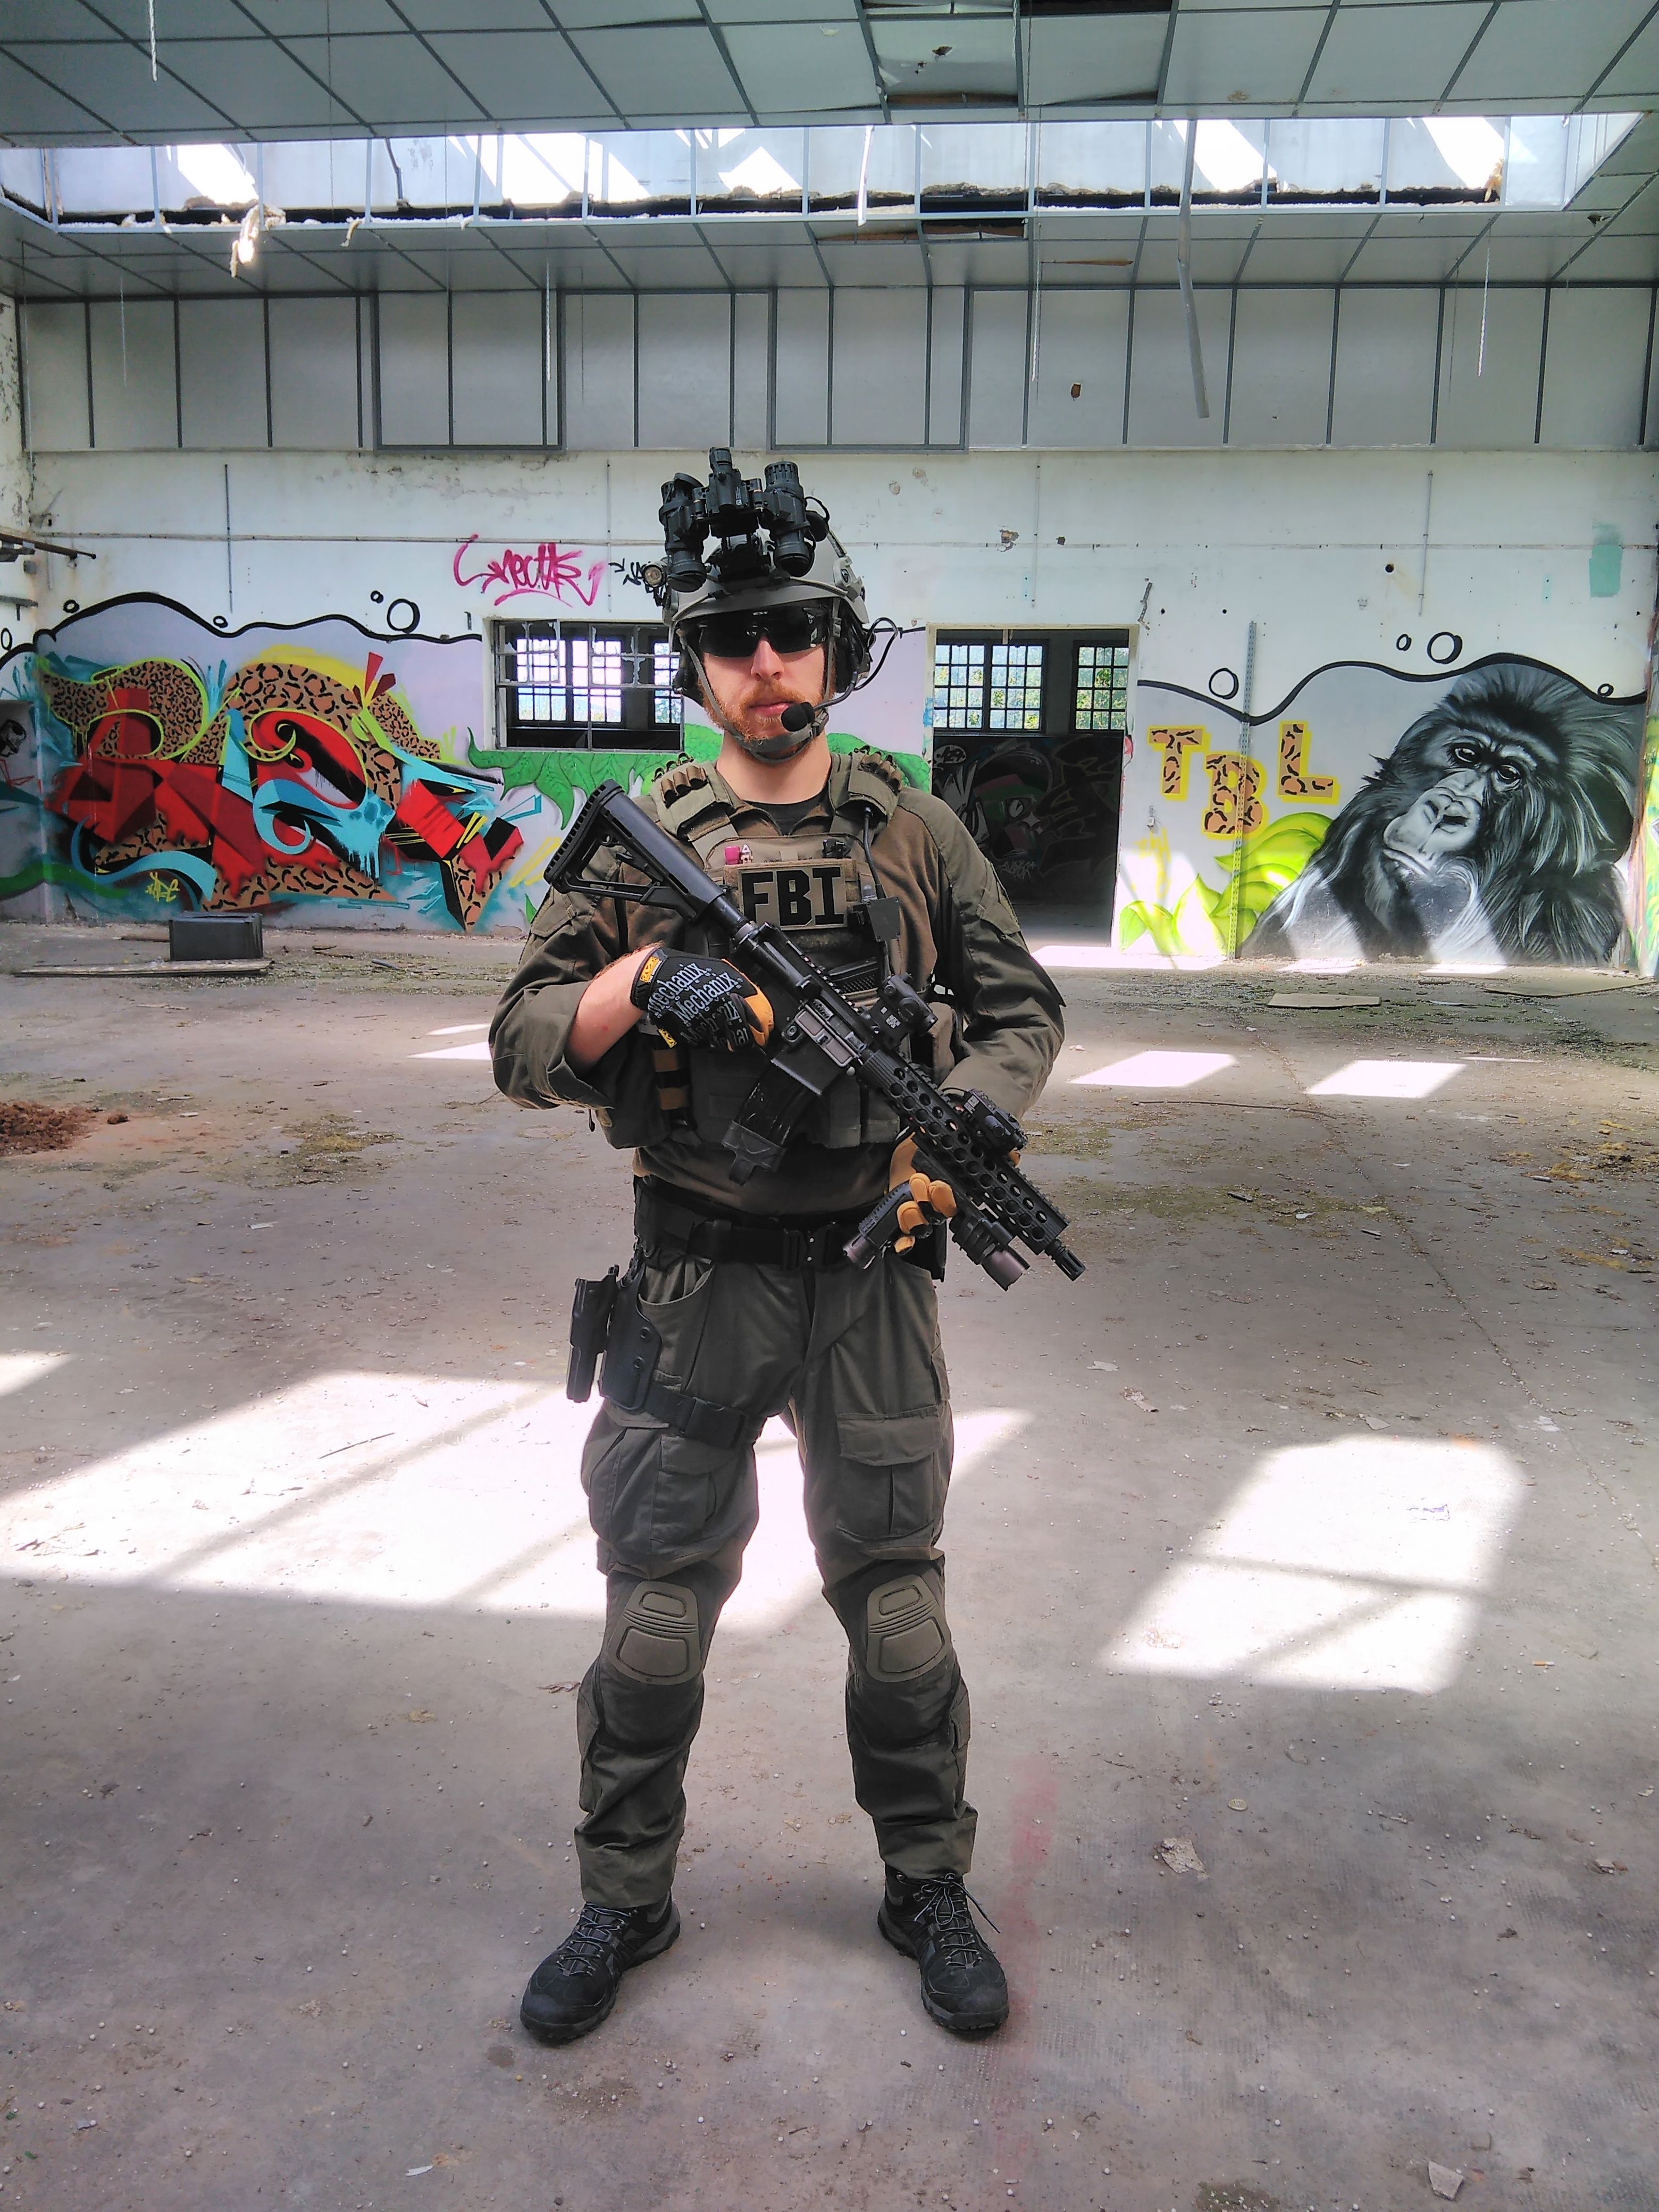 FBI SWAT L.A RANGER GREEN #FBISWAT #FBI #Rangergreen #RG. Military outfit, Military gear special forces, Special police